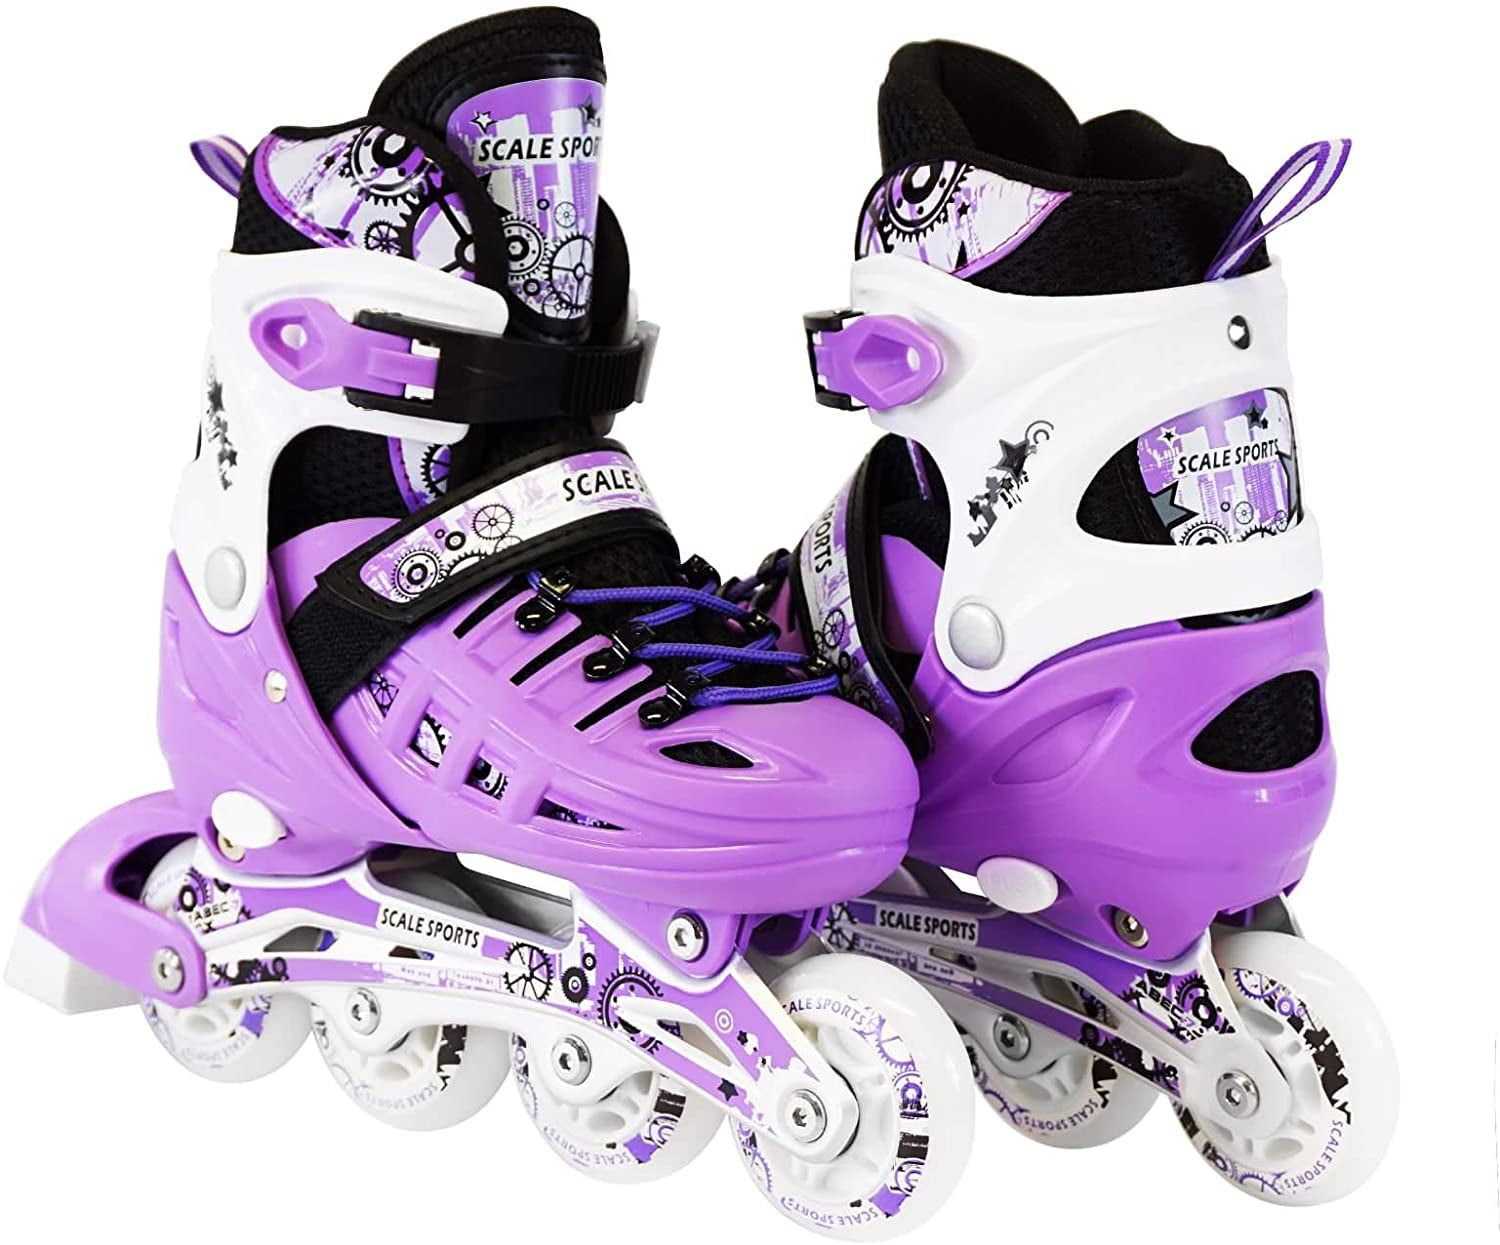 Kids Adjustable Inline Skates Scale Sports Sizes Safe Durable Outdoor Featuring Illuminating Front Wheels 